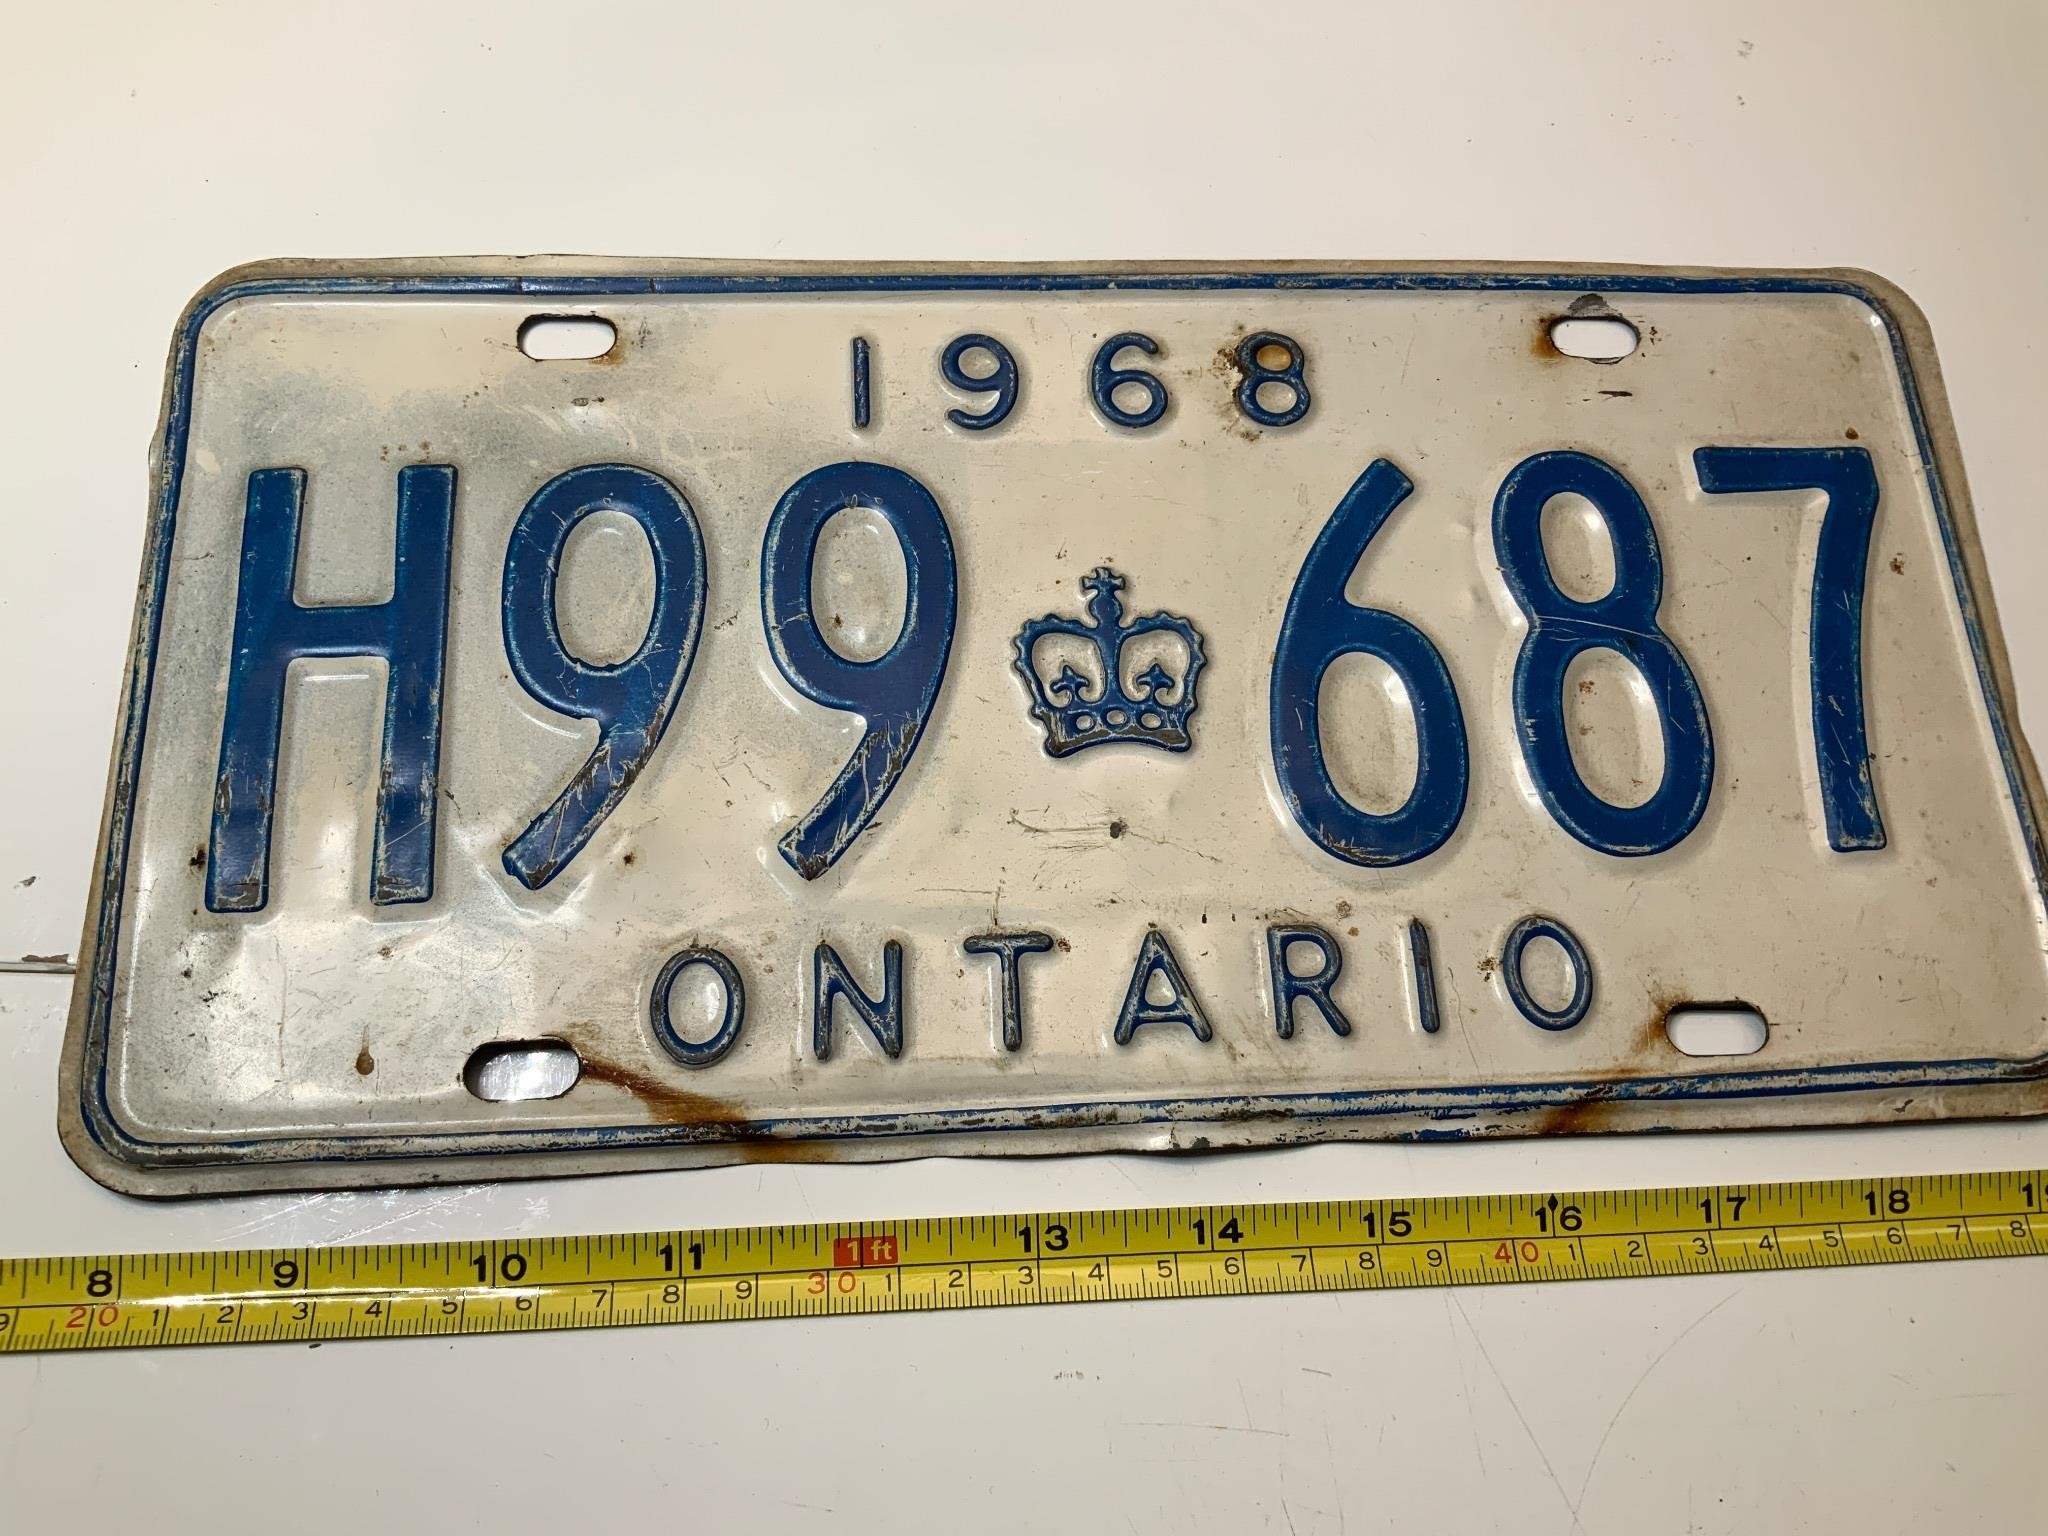 Ontario 1968 licence plate